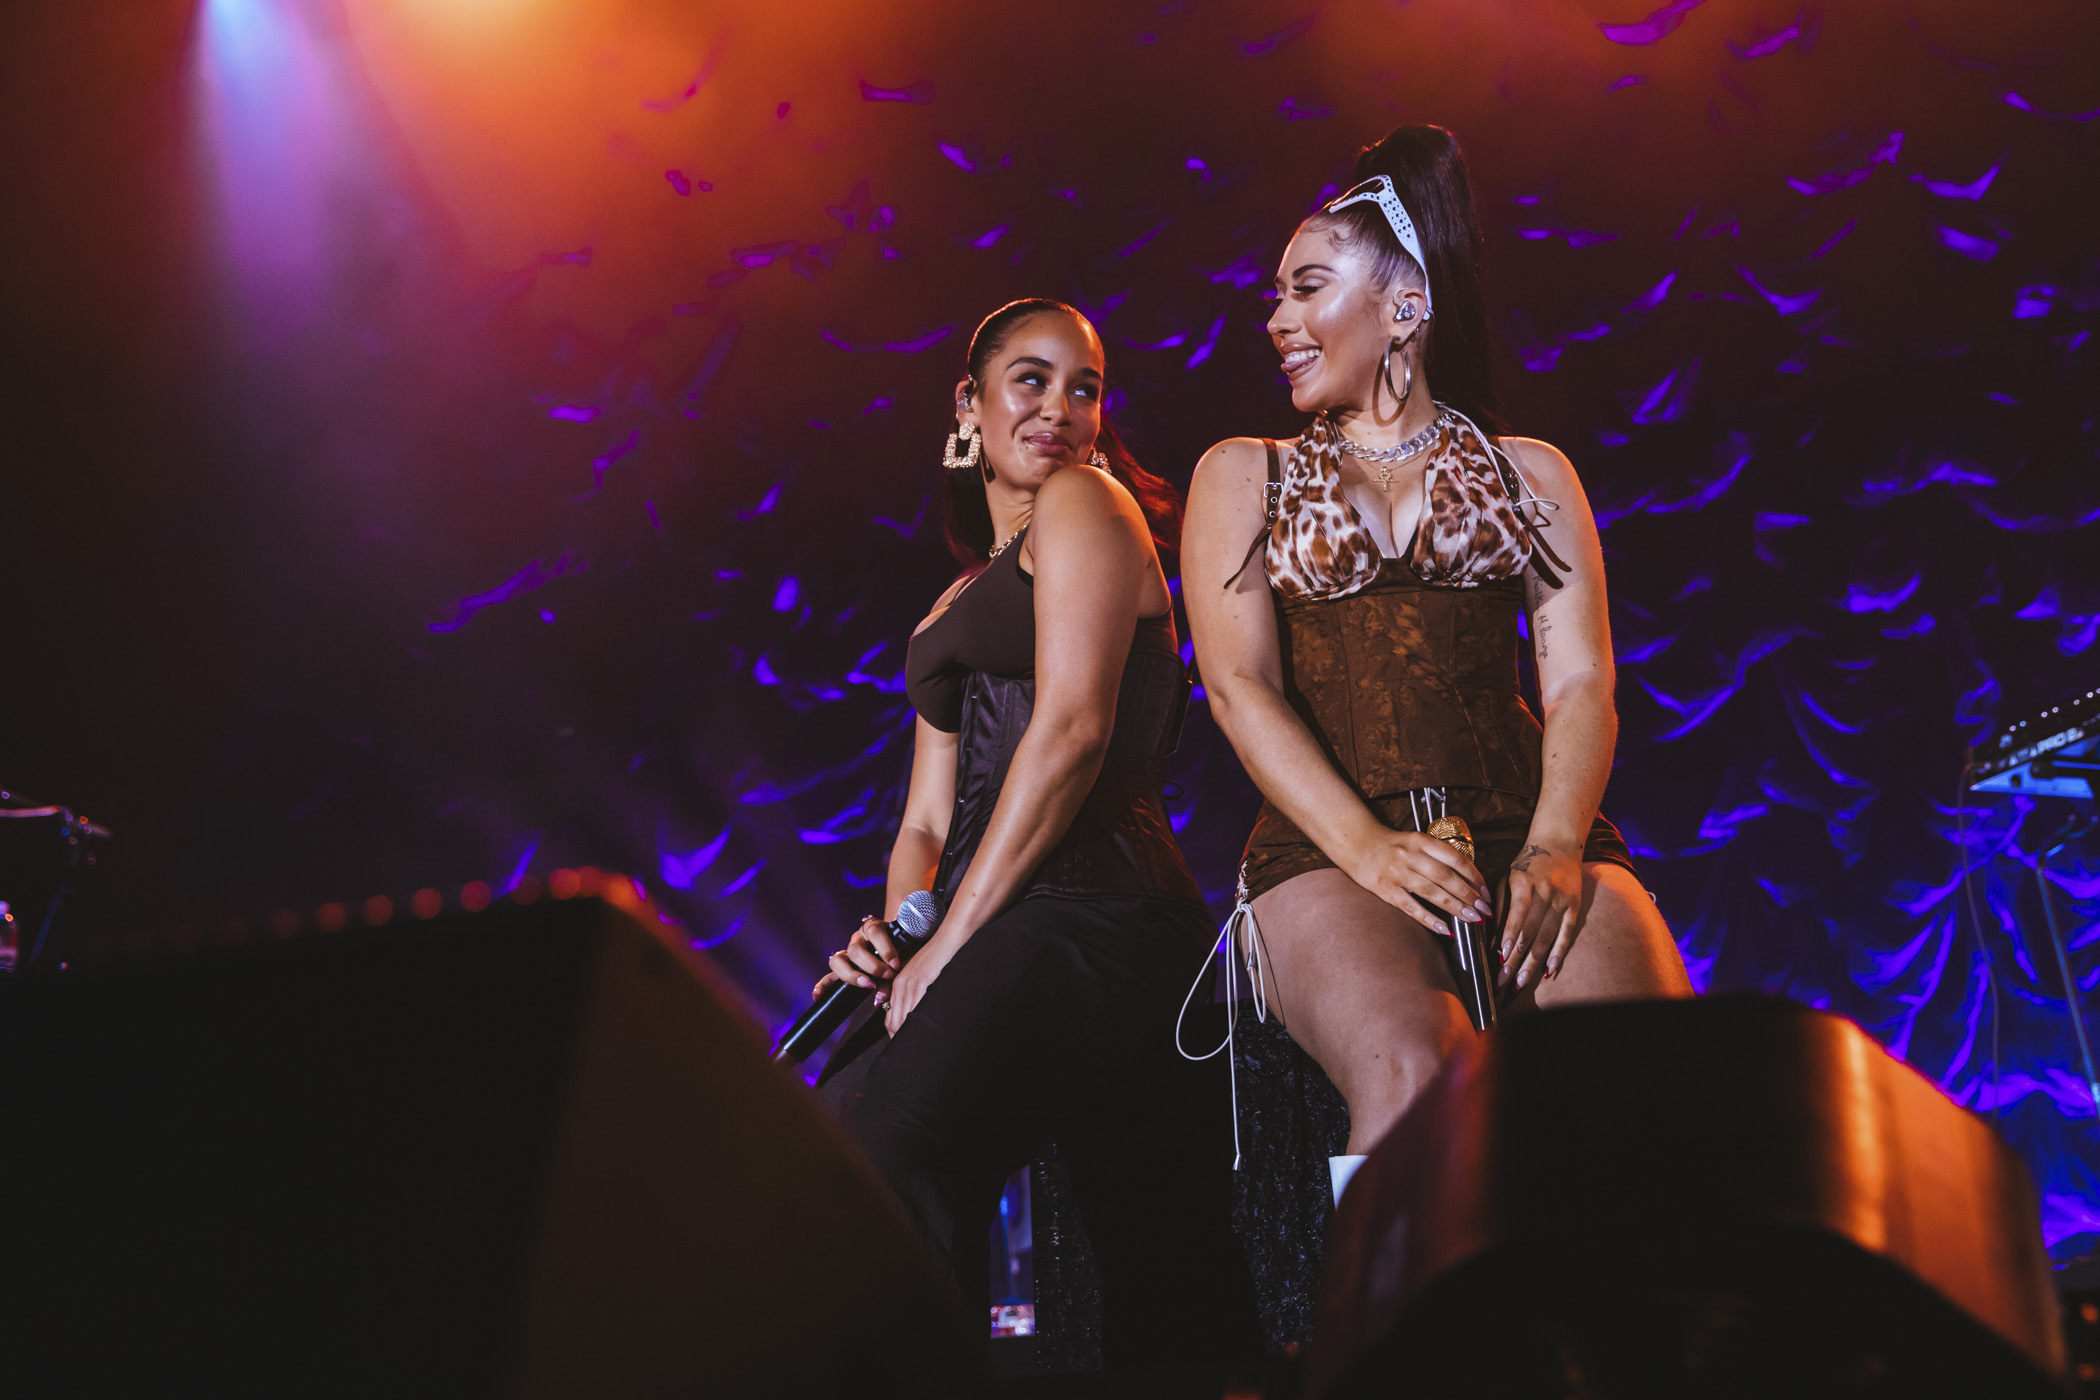 Jorja Smith and Kali Uchis: The Duo You Need